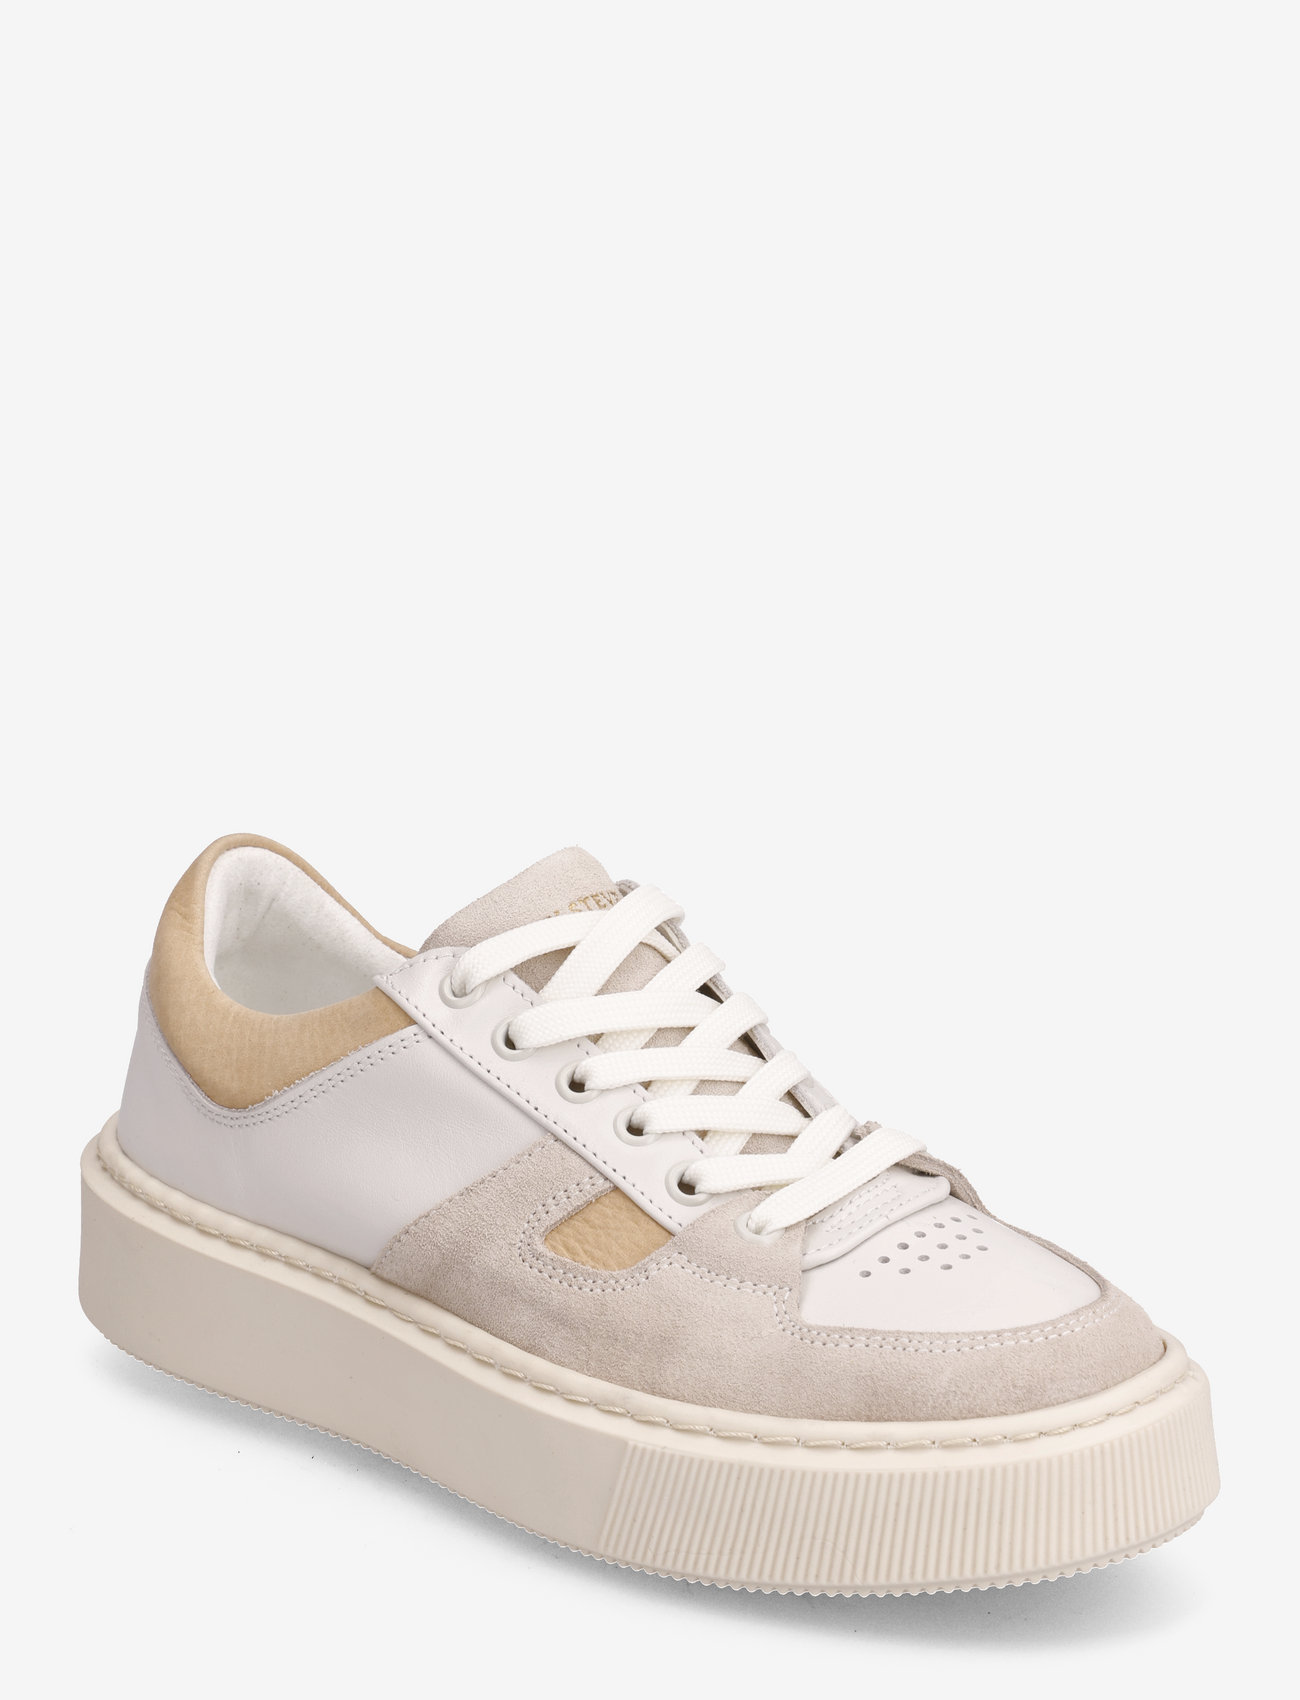 Sneaky Steve - Away W Leather Shoe - lage sneakers - creme/nude - 0